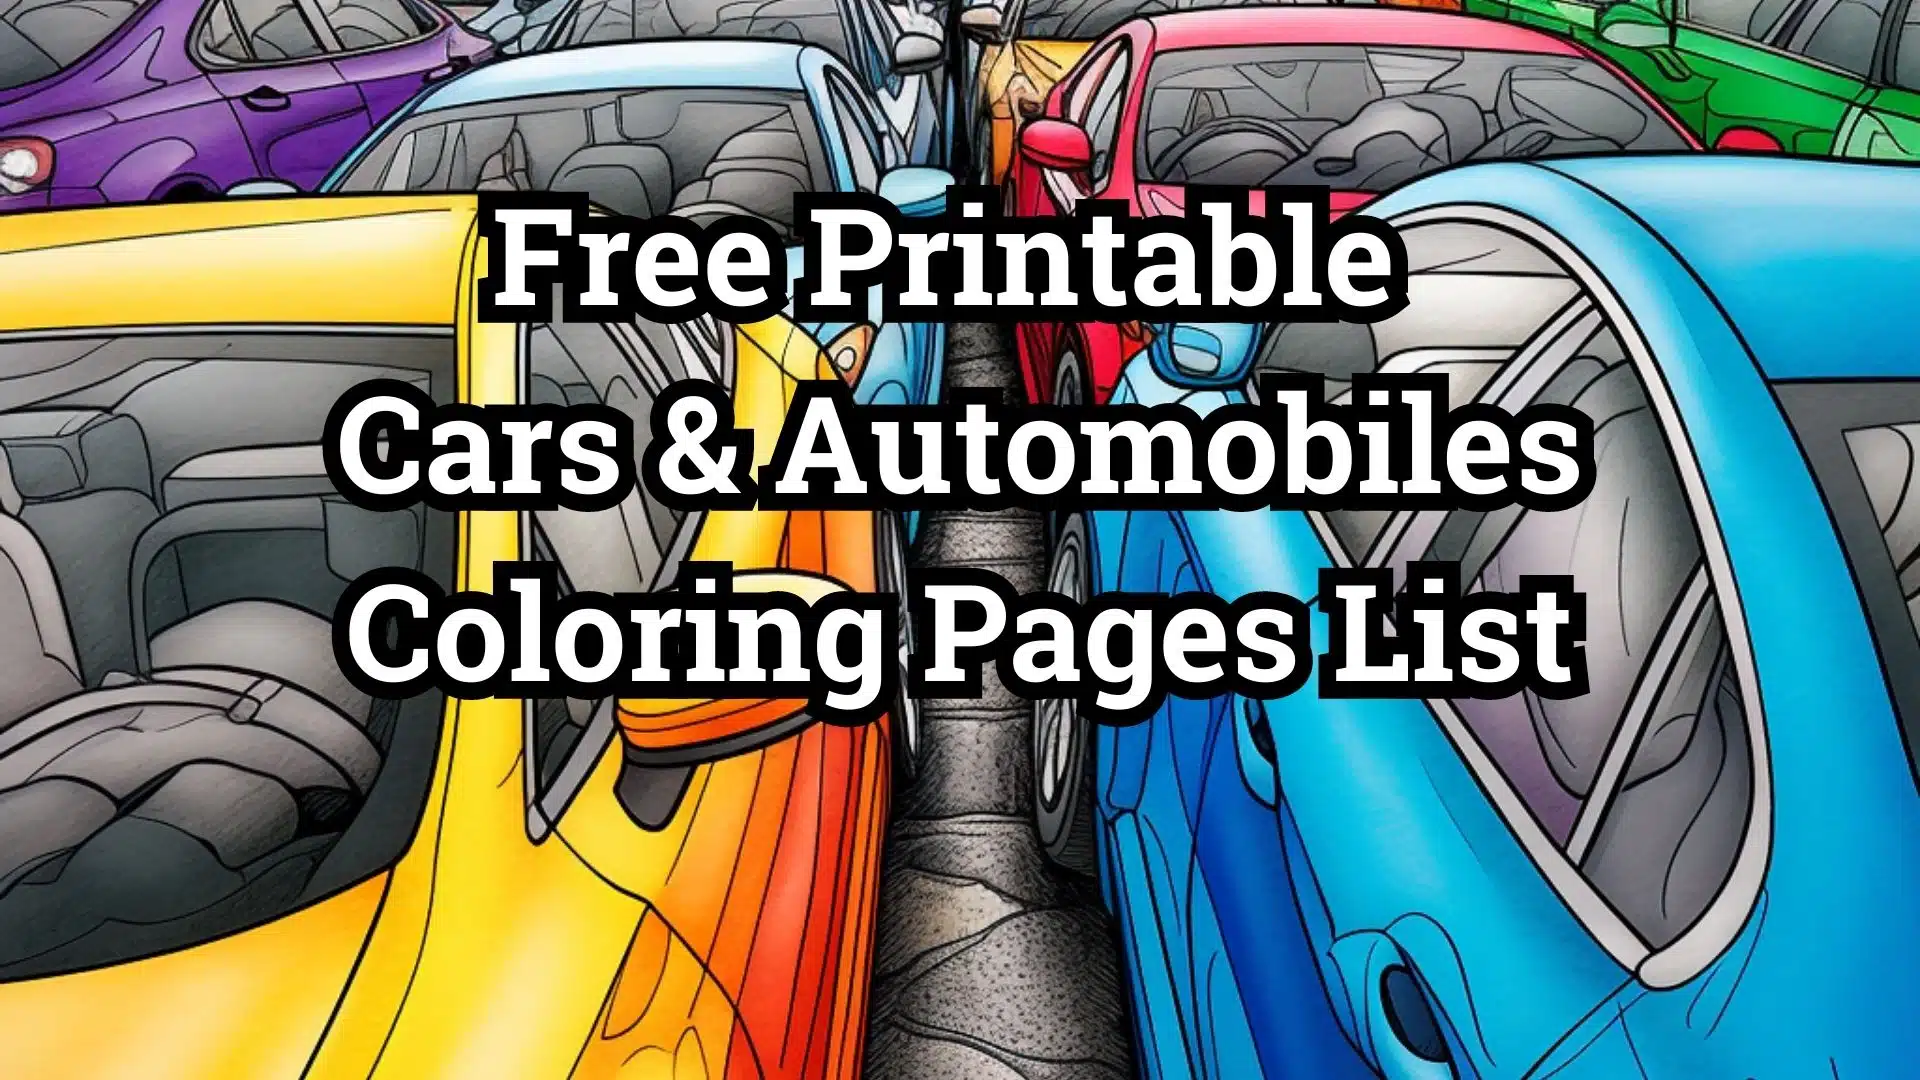 Free Printable Cars & Automobiles Coloring Pages List